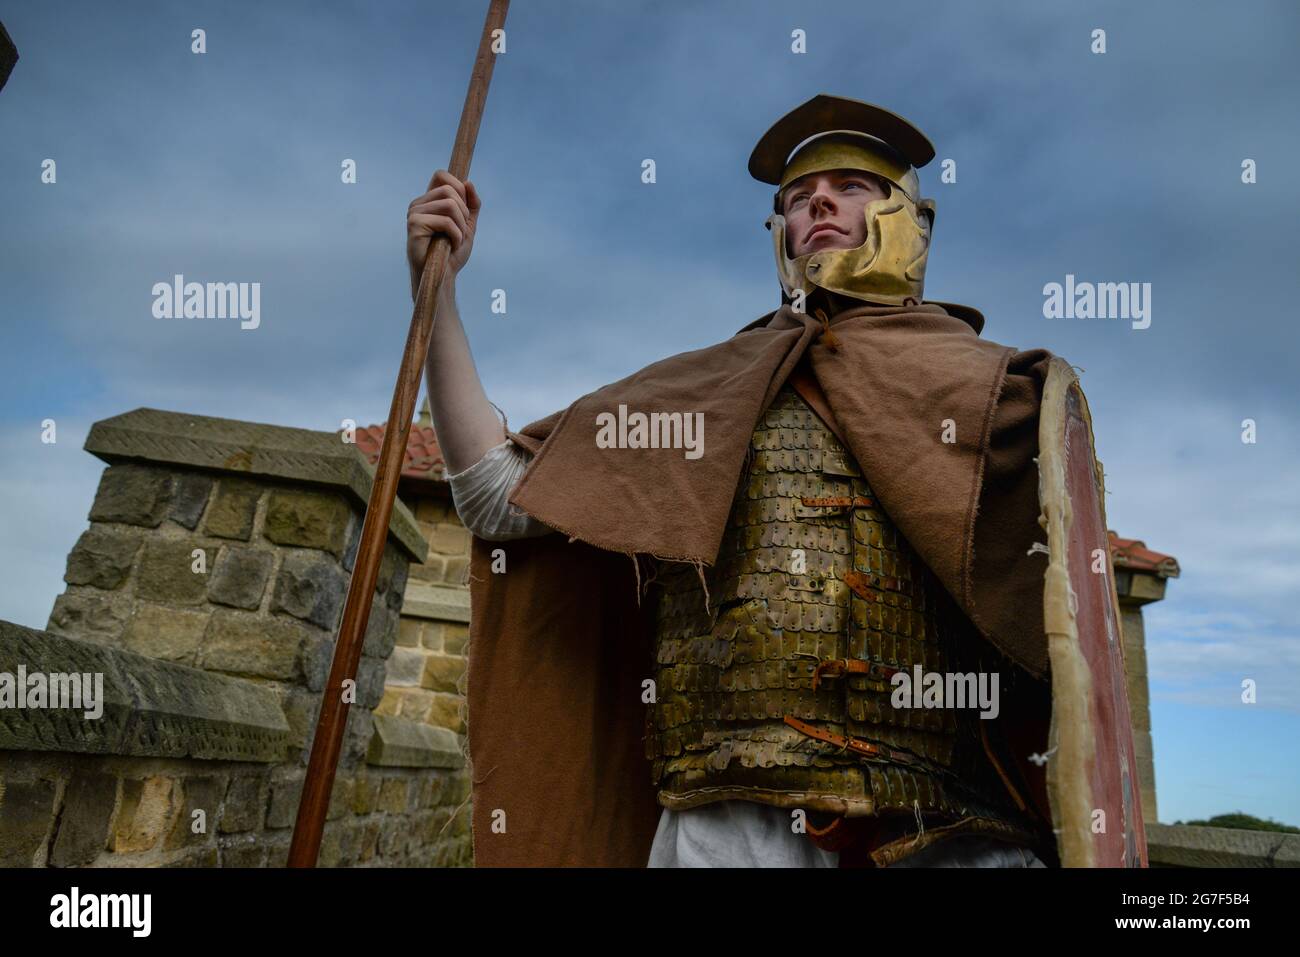 Reenactor at the reconstructed Roman Fort Arbeia, South Shields dressed as soldiers of the late 2nd early 3rd century AD Stock Photo